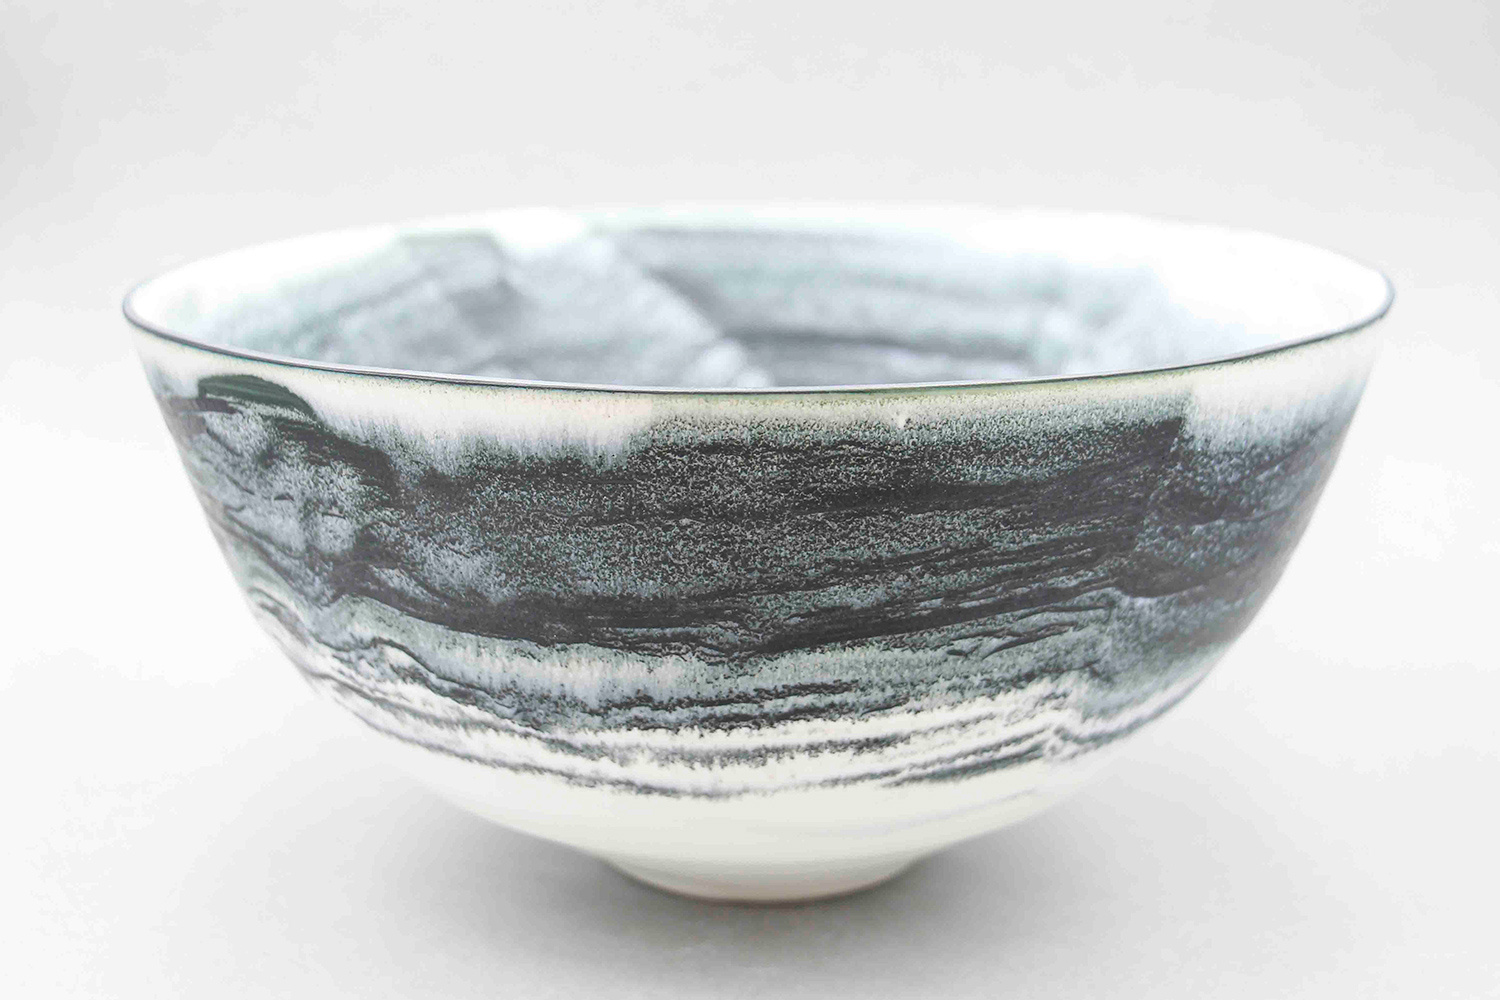 Shallow Bowl by Kyra Cane